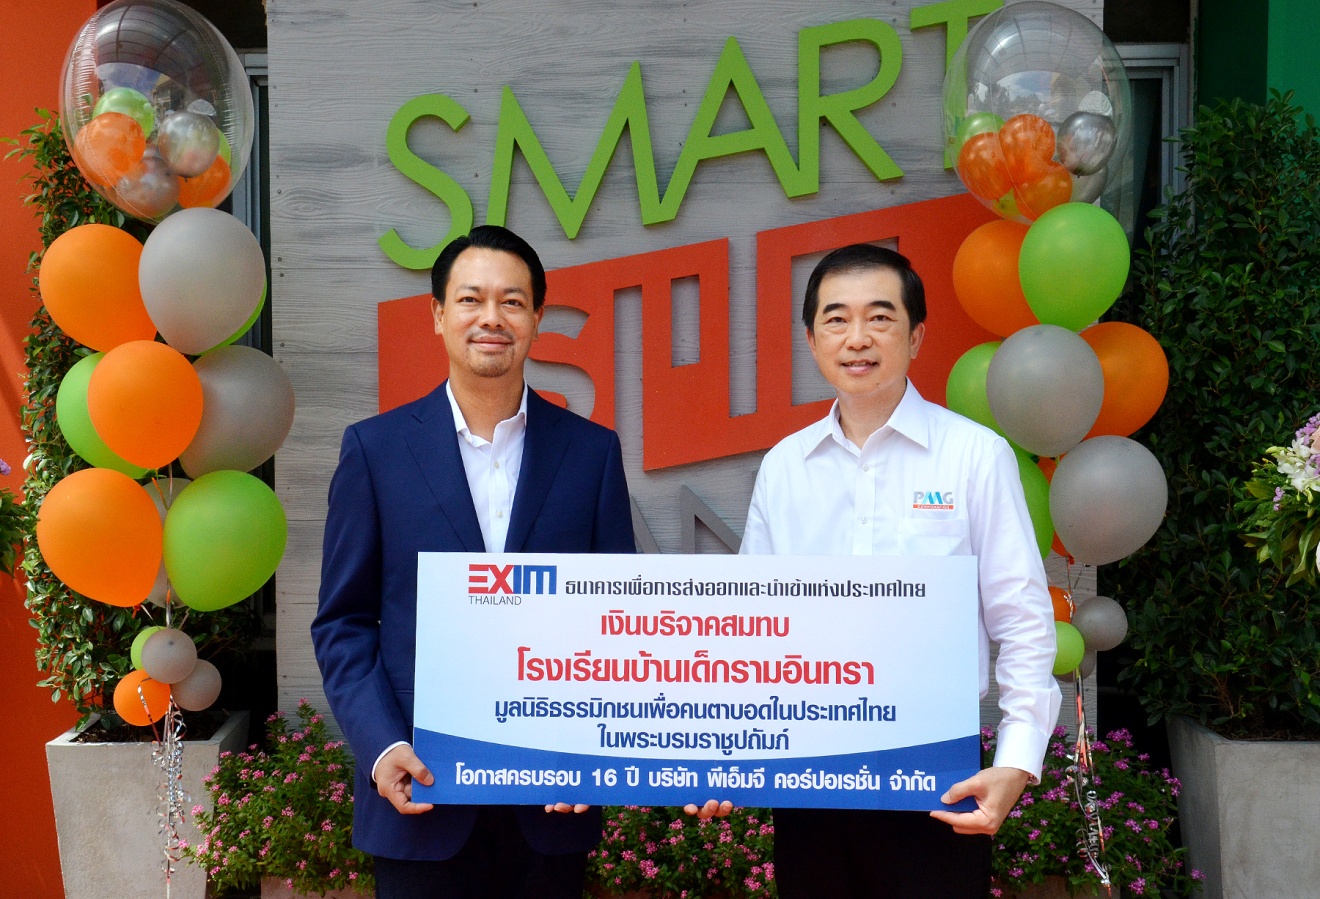 EXIM Thailand Supports Children in Ban Dek Ramindra School on the Occasion of 5th Anniversary of Smart SME Channel